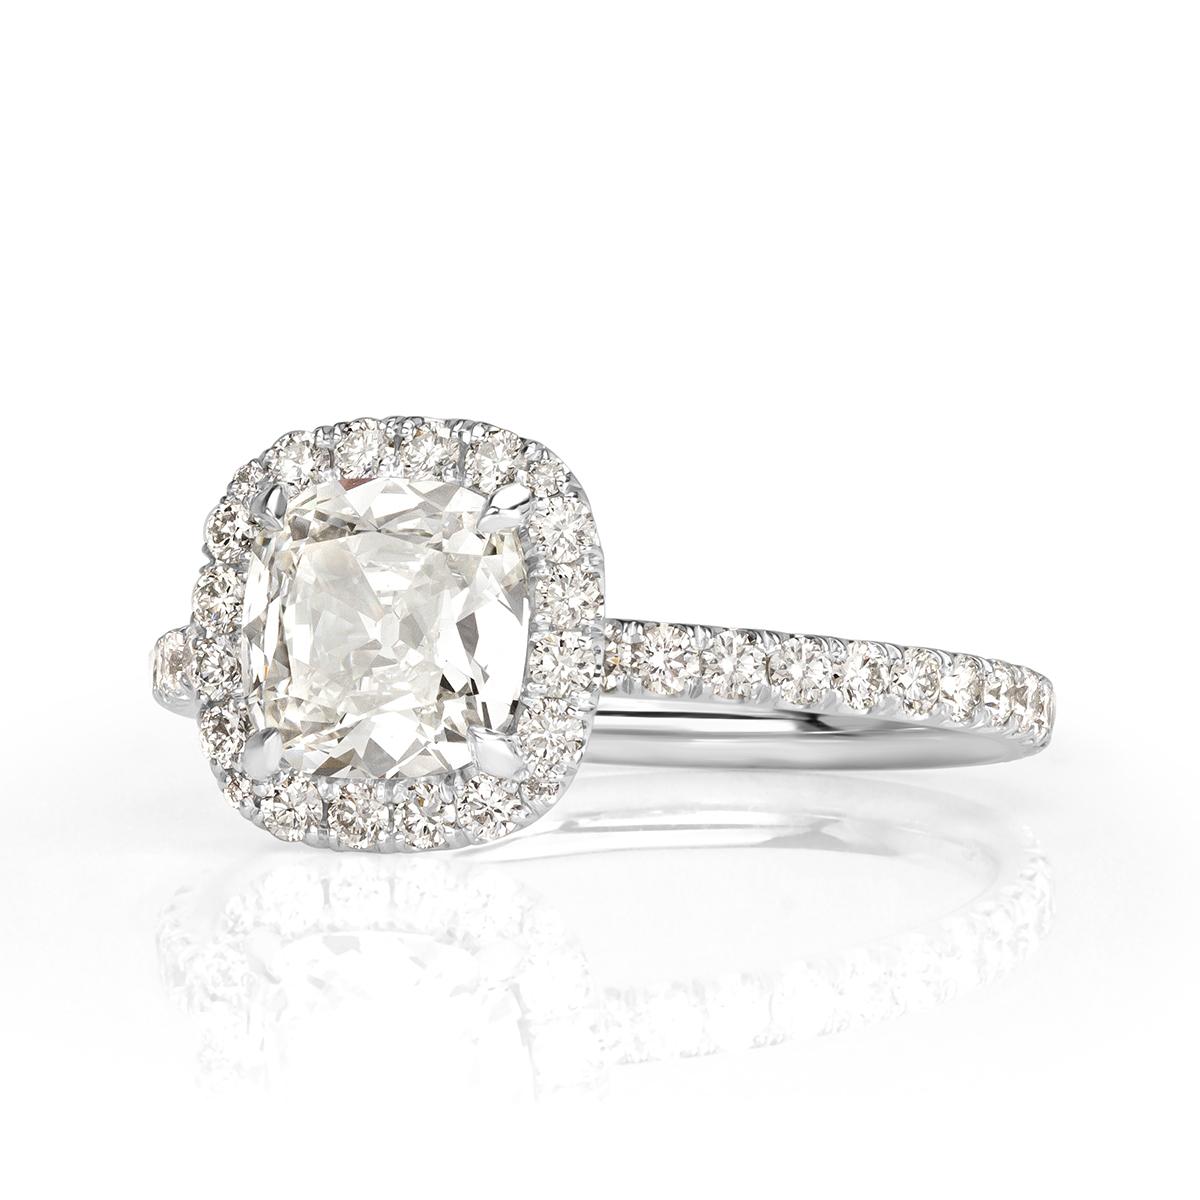 Custom created in platinum, this ravishing diamond engagement ring features a gorgeous 1.05ct old Mine cut center diamond, GIA certified at H in color, VS1 in clarity. It faces up peerless white, perfectly clear and has a tremendously beautiful cut.